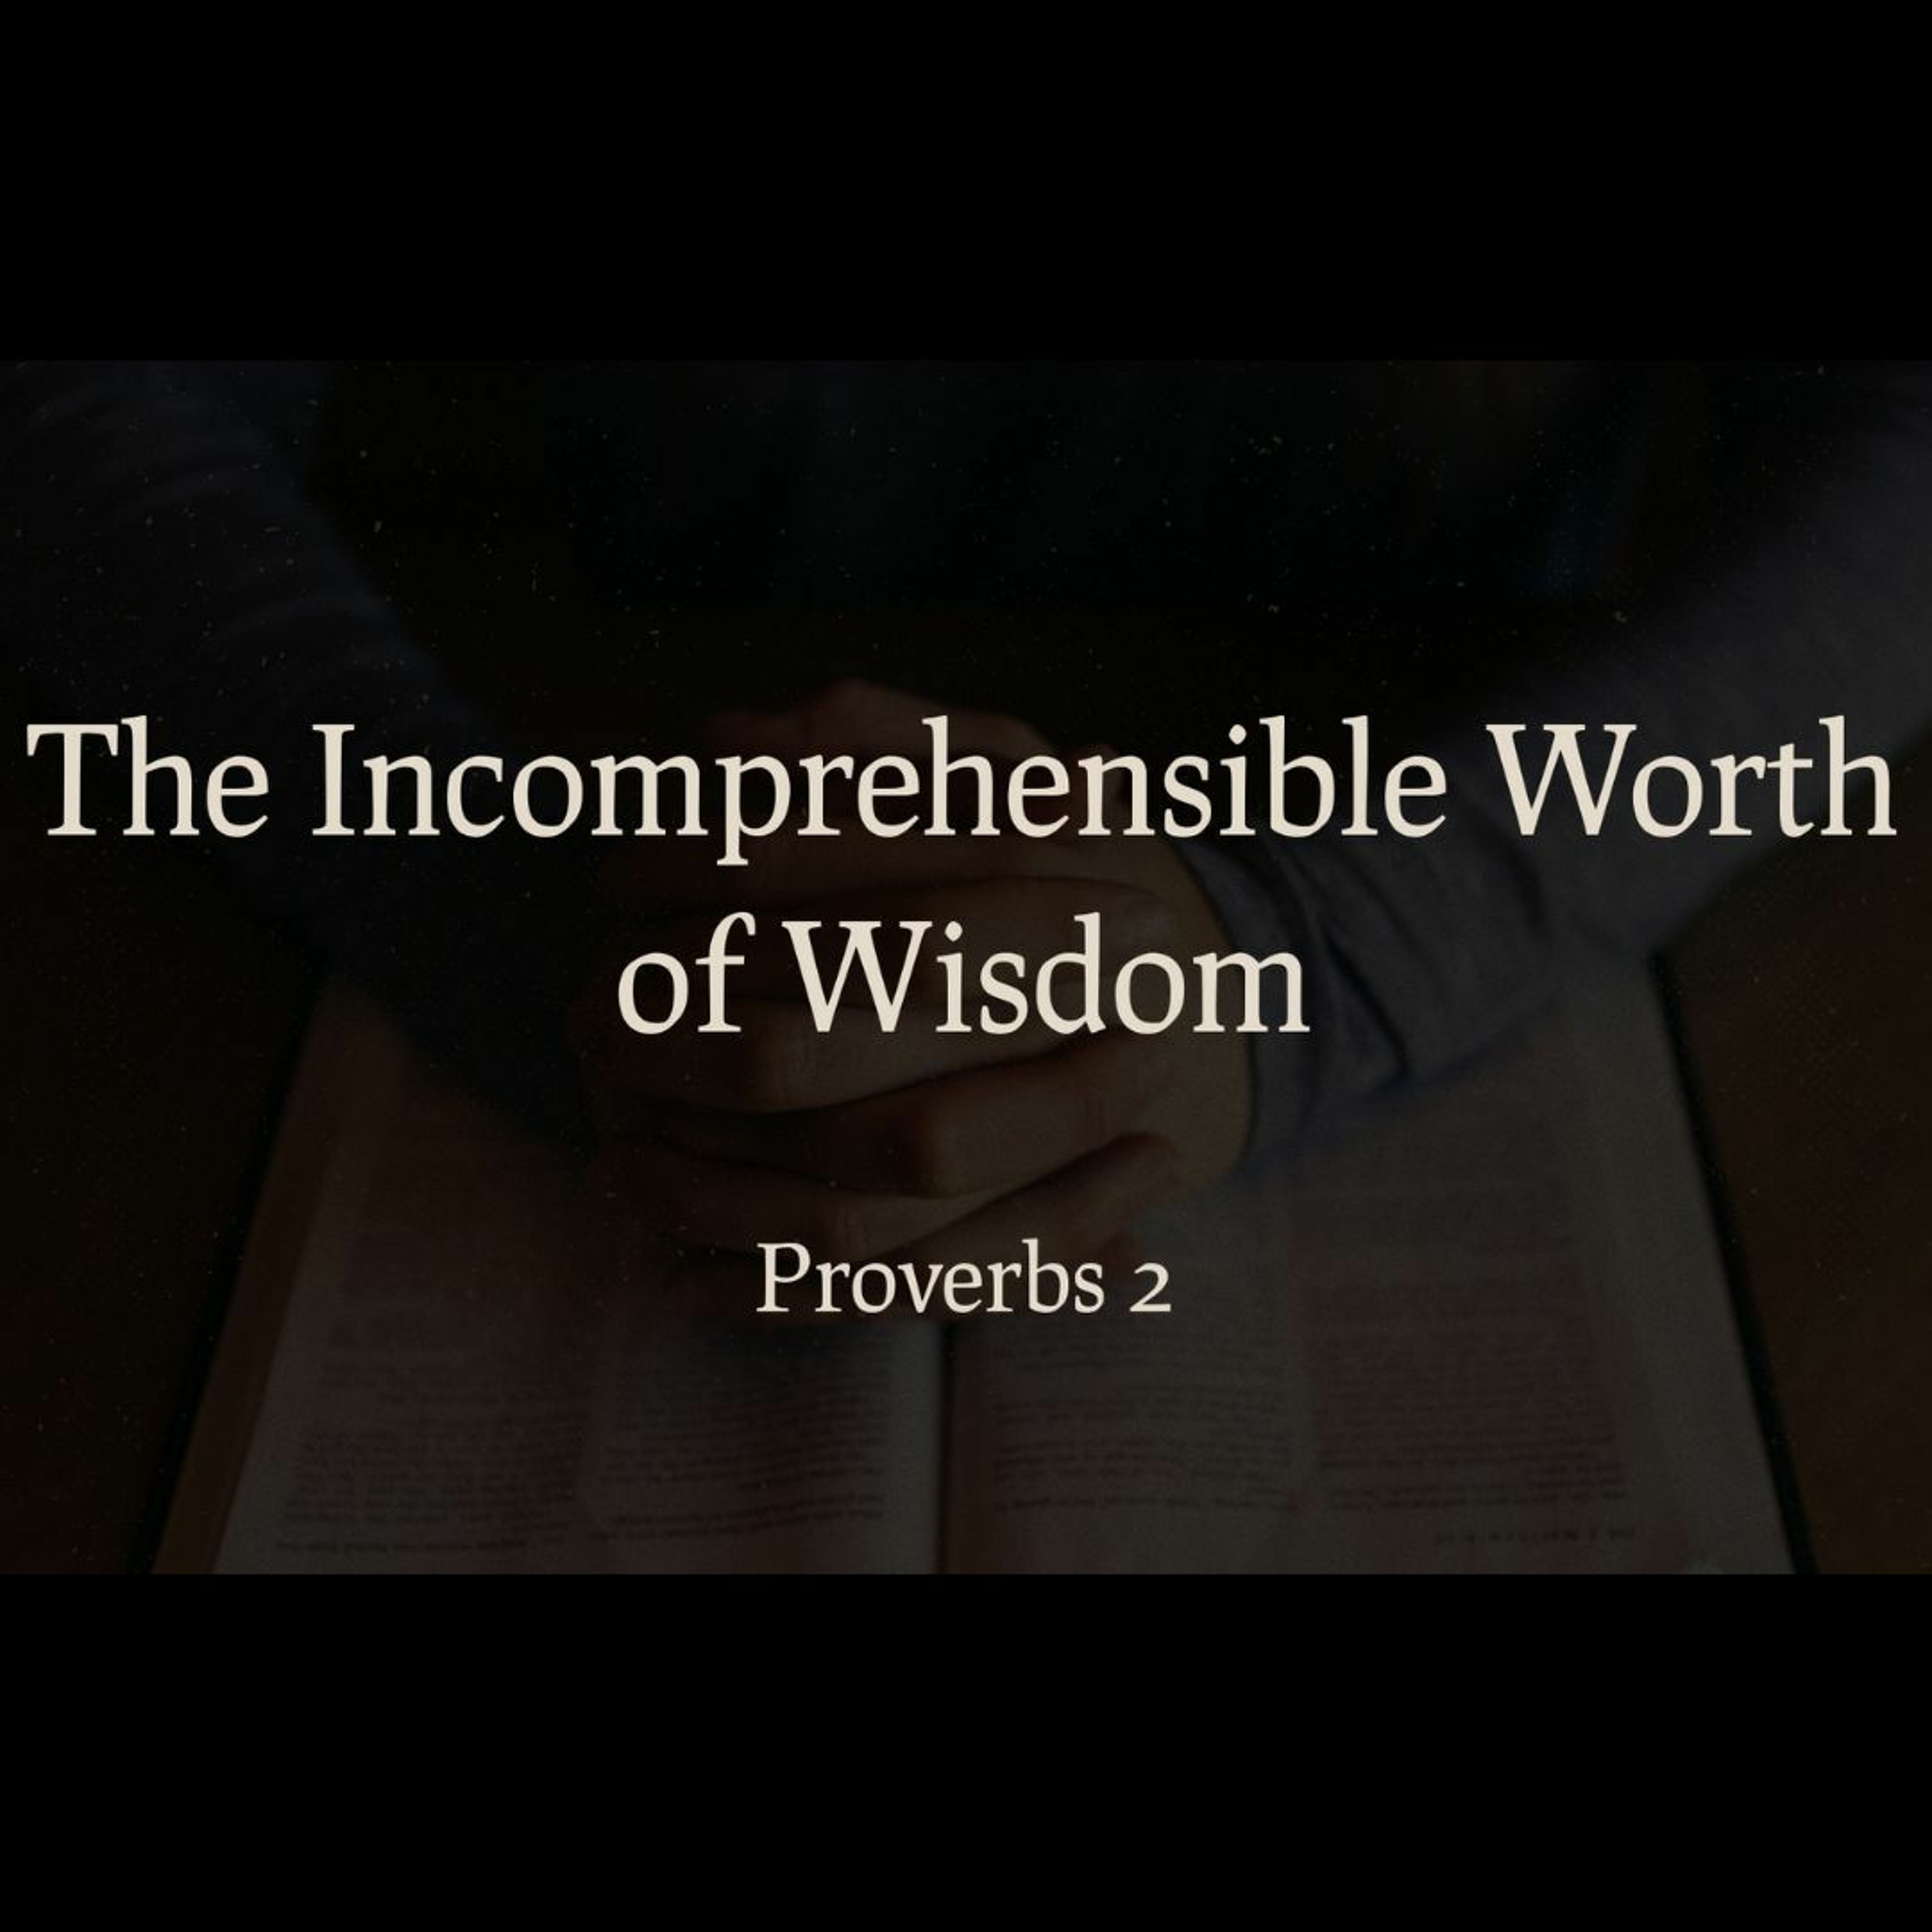 The Incomprehensible Worth of Wisdom (Proverbs 2)